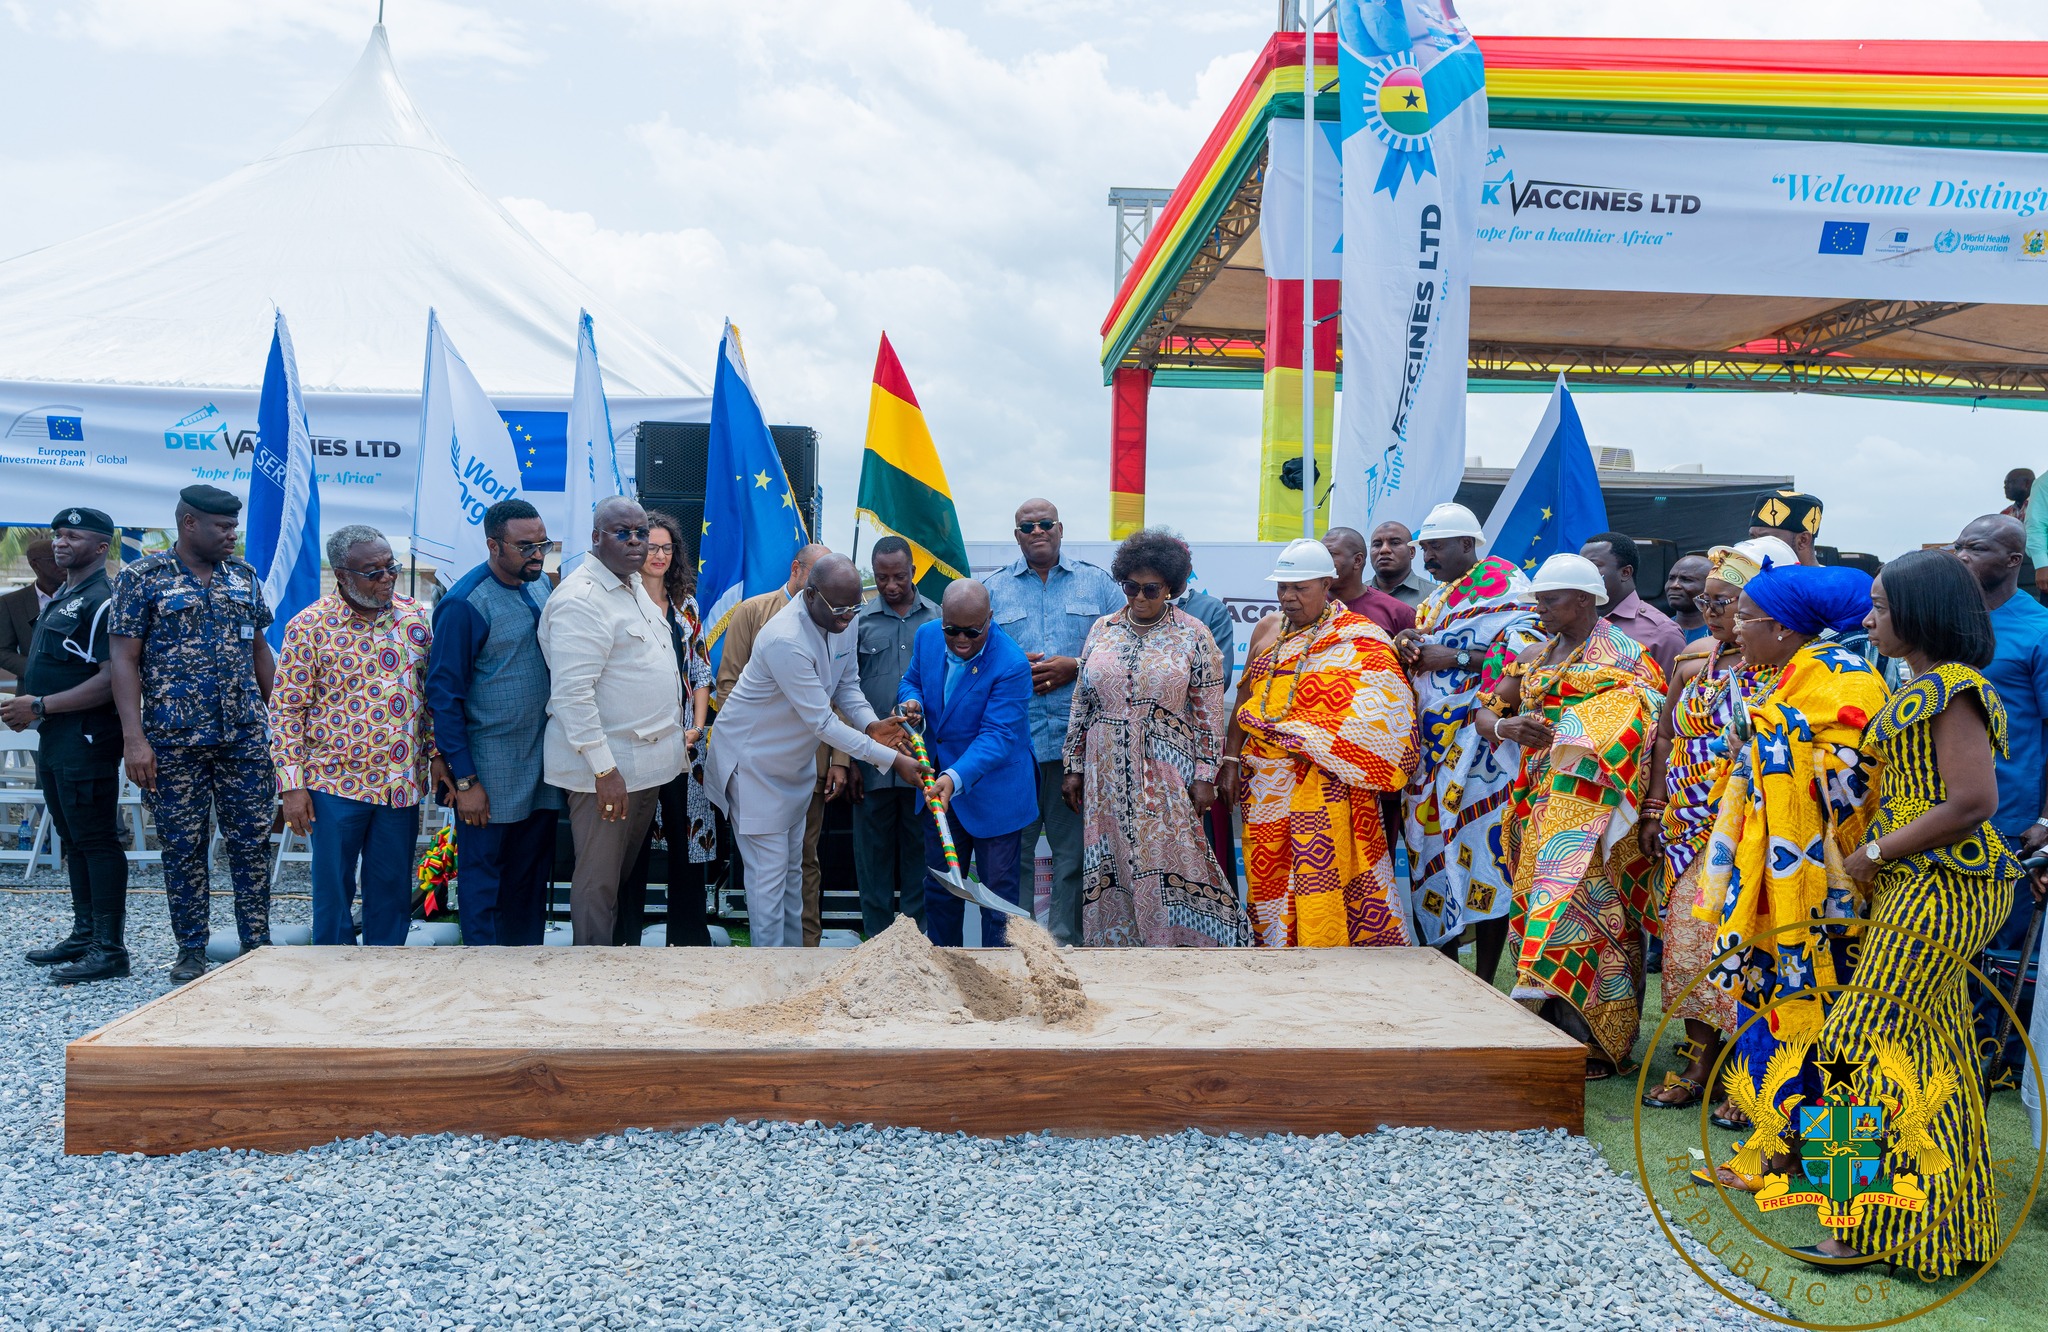 President Akufo-Addo Cuts Sod For The Construction of Vaccine Manufacturing Plant In Ga West